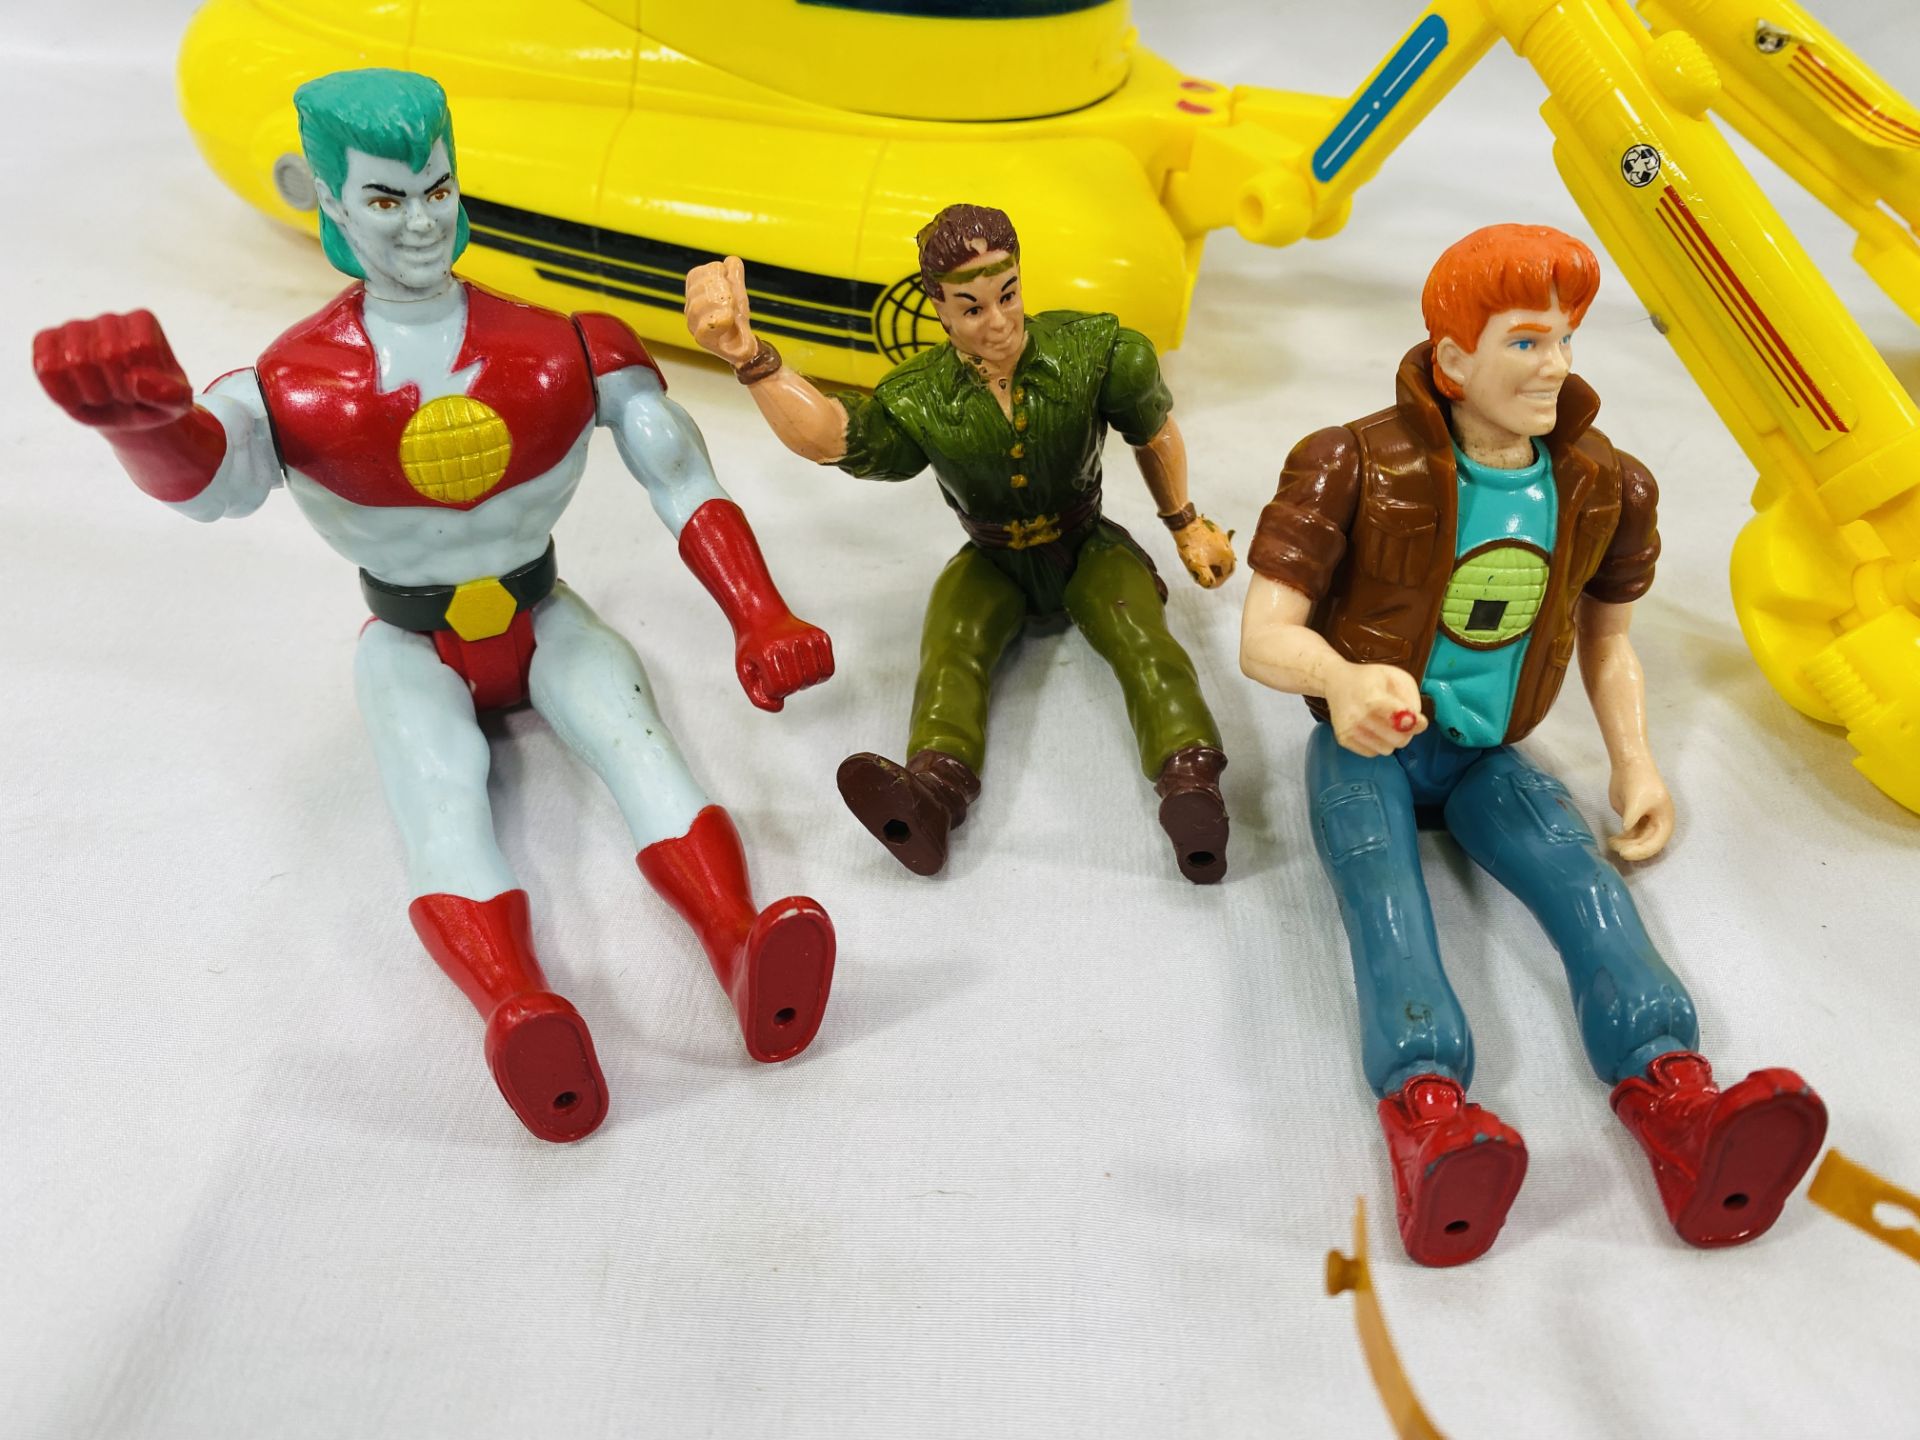 A Captain Planet vehicle, accessories and figure - Image 3 of 8